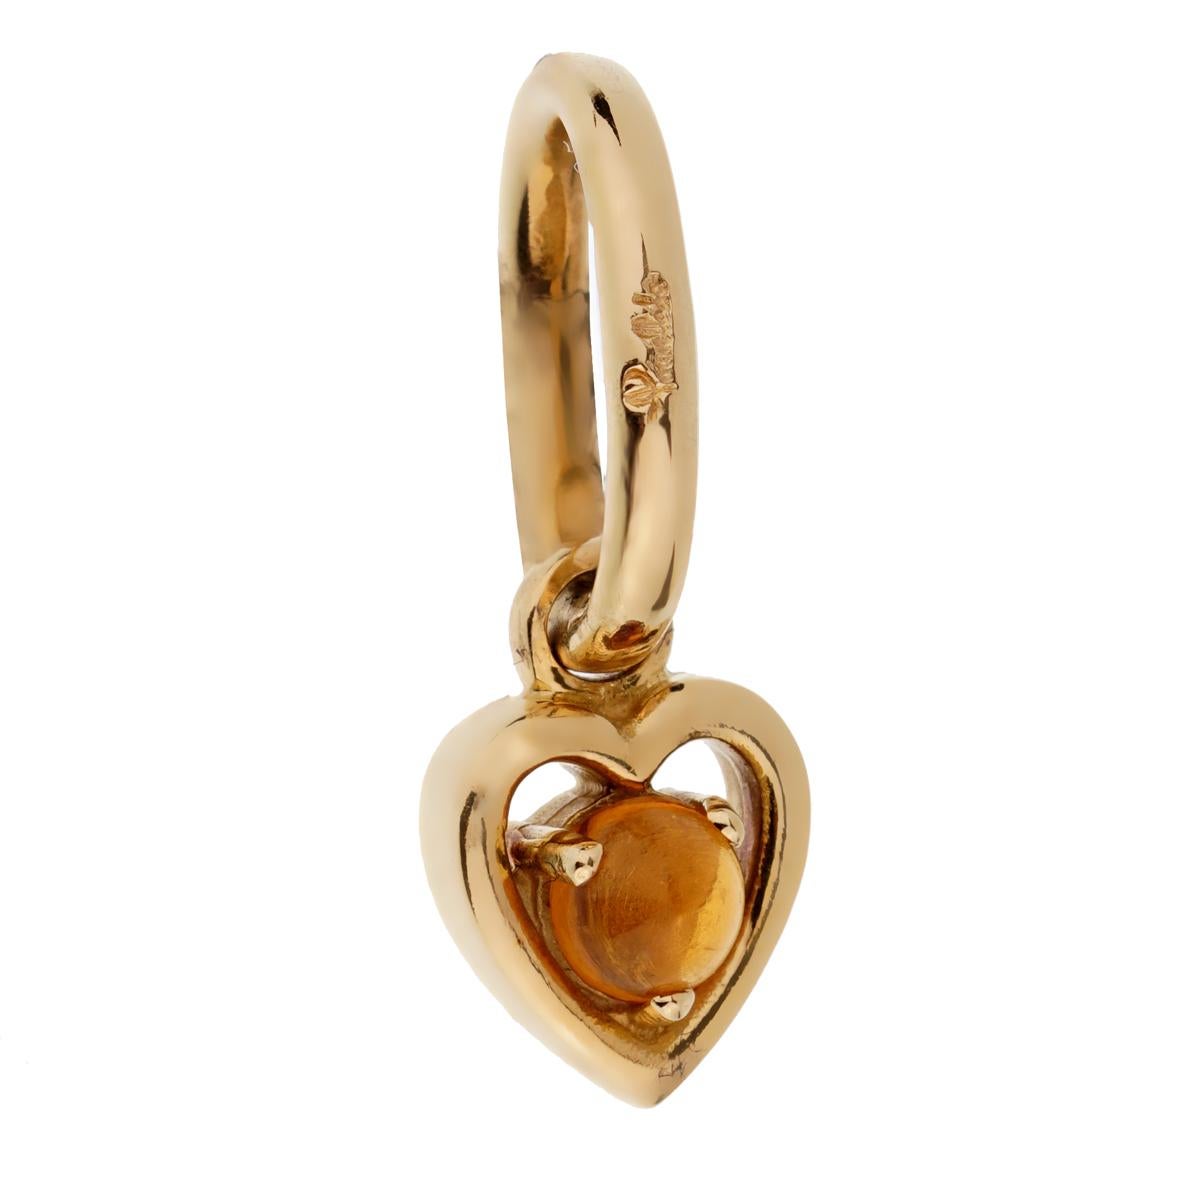 A chic brand new Pomellato charm pendant featuring a .30ct citrine set in 18k yellow gold. 

Sku: 2216